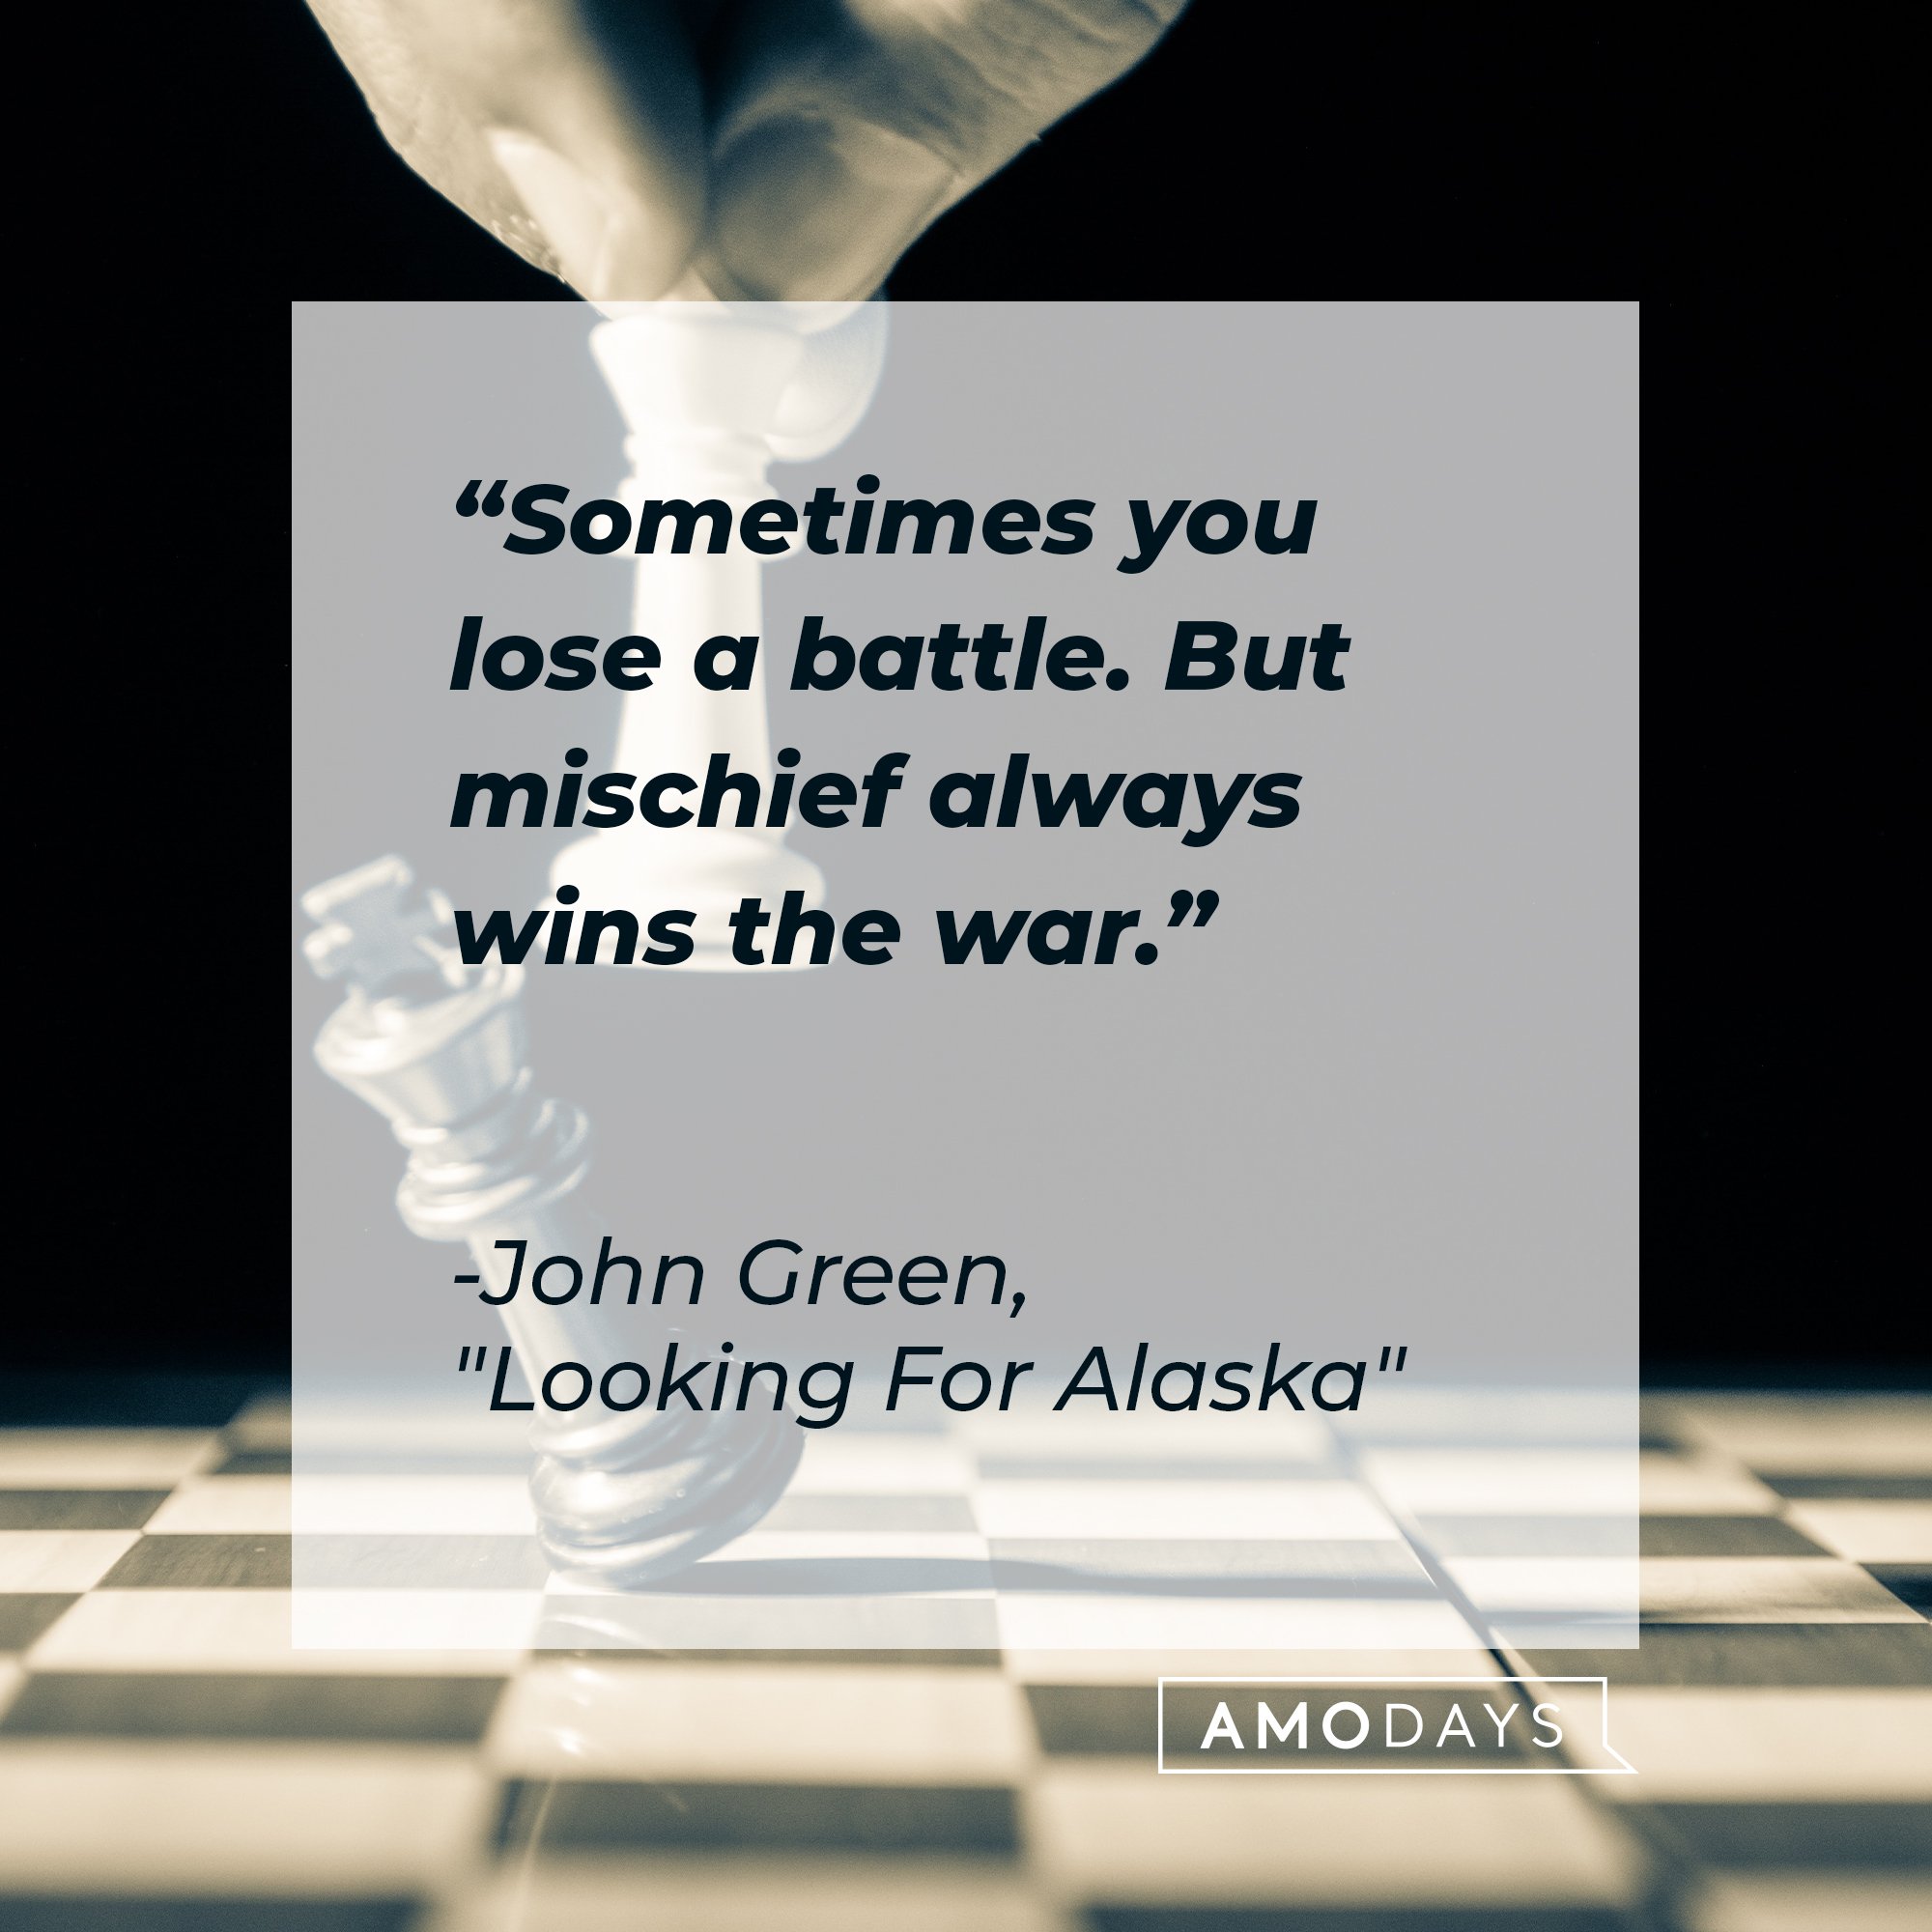 John Green’s quote from “Looking For Alaska": "Sometimes you lose a battle. But mischief always wins the war.” | Image: AmoDays